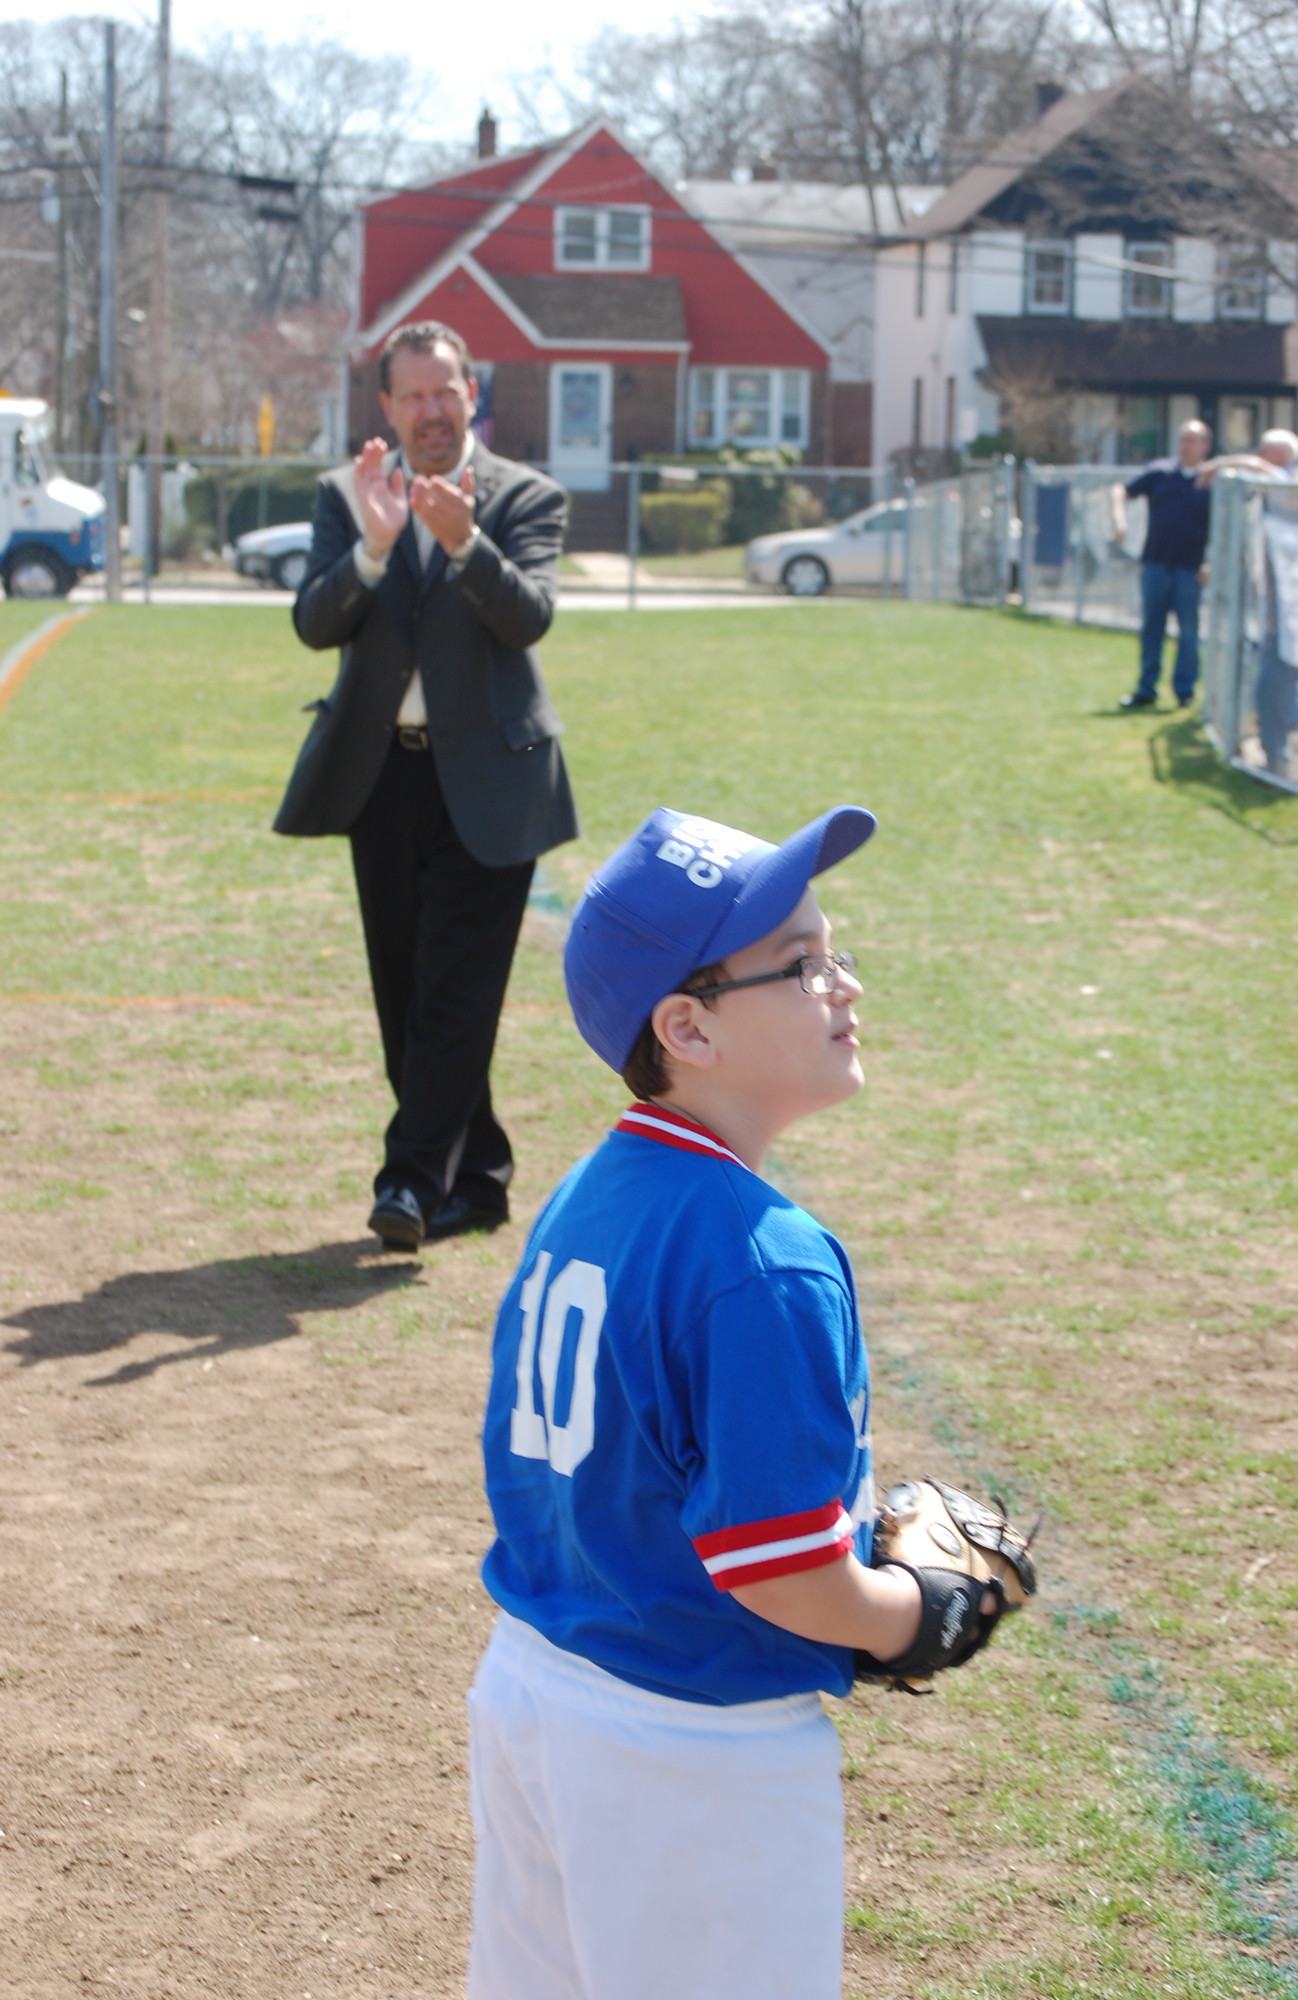 Nicholas Baez, 9, caught the first pitch from Mayor Ed Fare.